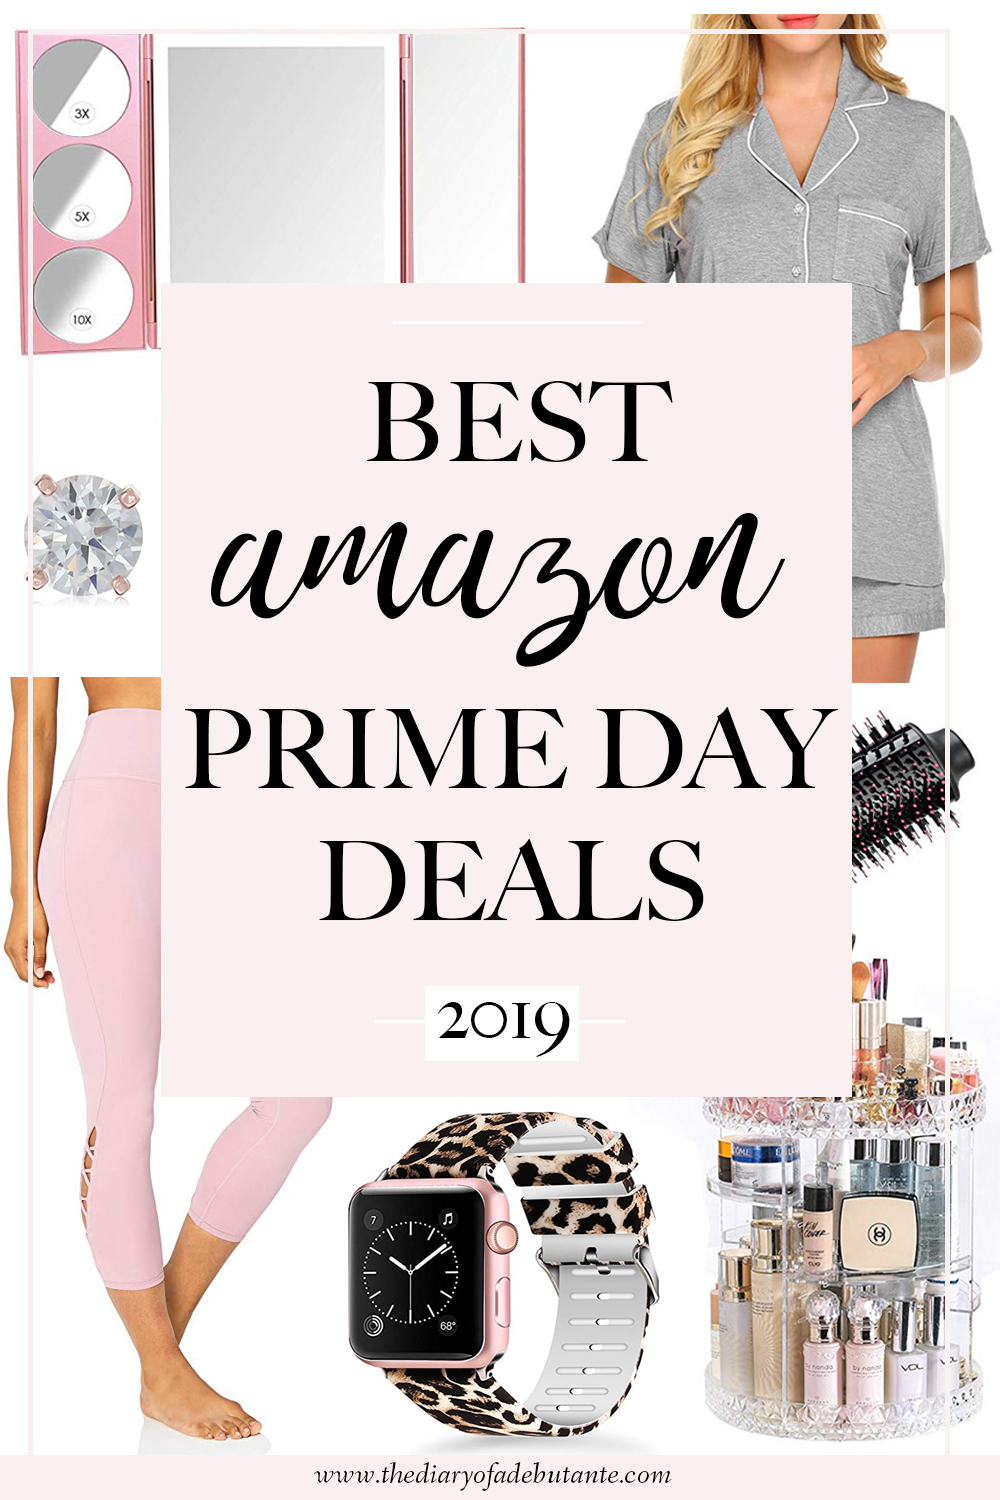 top prime day women's fashion deals, best prime day 2019 womens fashion deals, best prime day 2019 fashion deals, Best Prime Day 2019 Deals by popular affordable fashion blogger Stephanie Ziajka from Diary of a Debutante